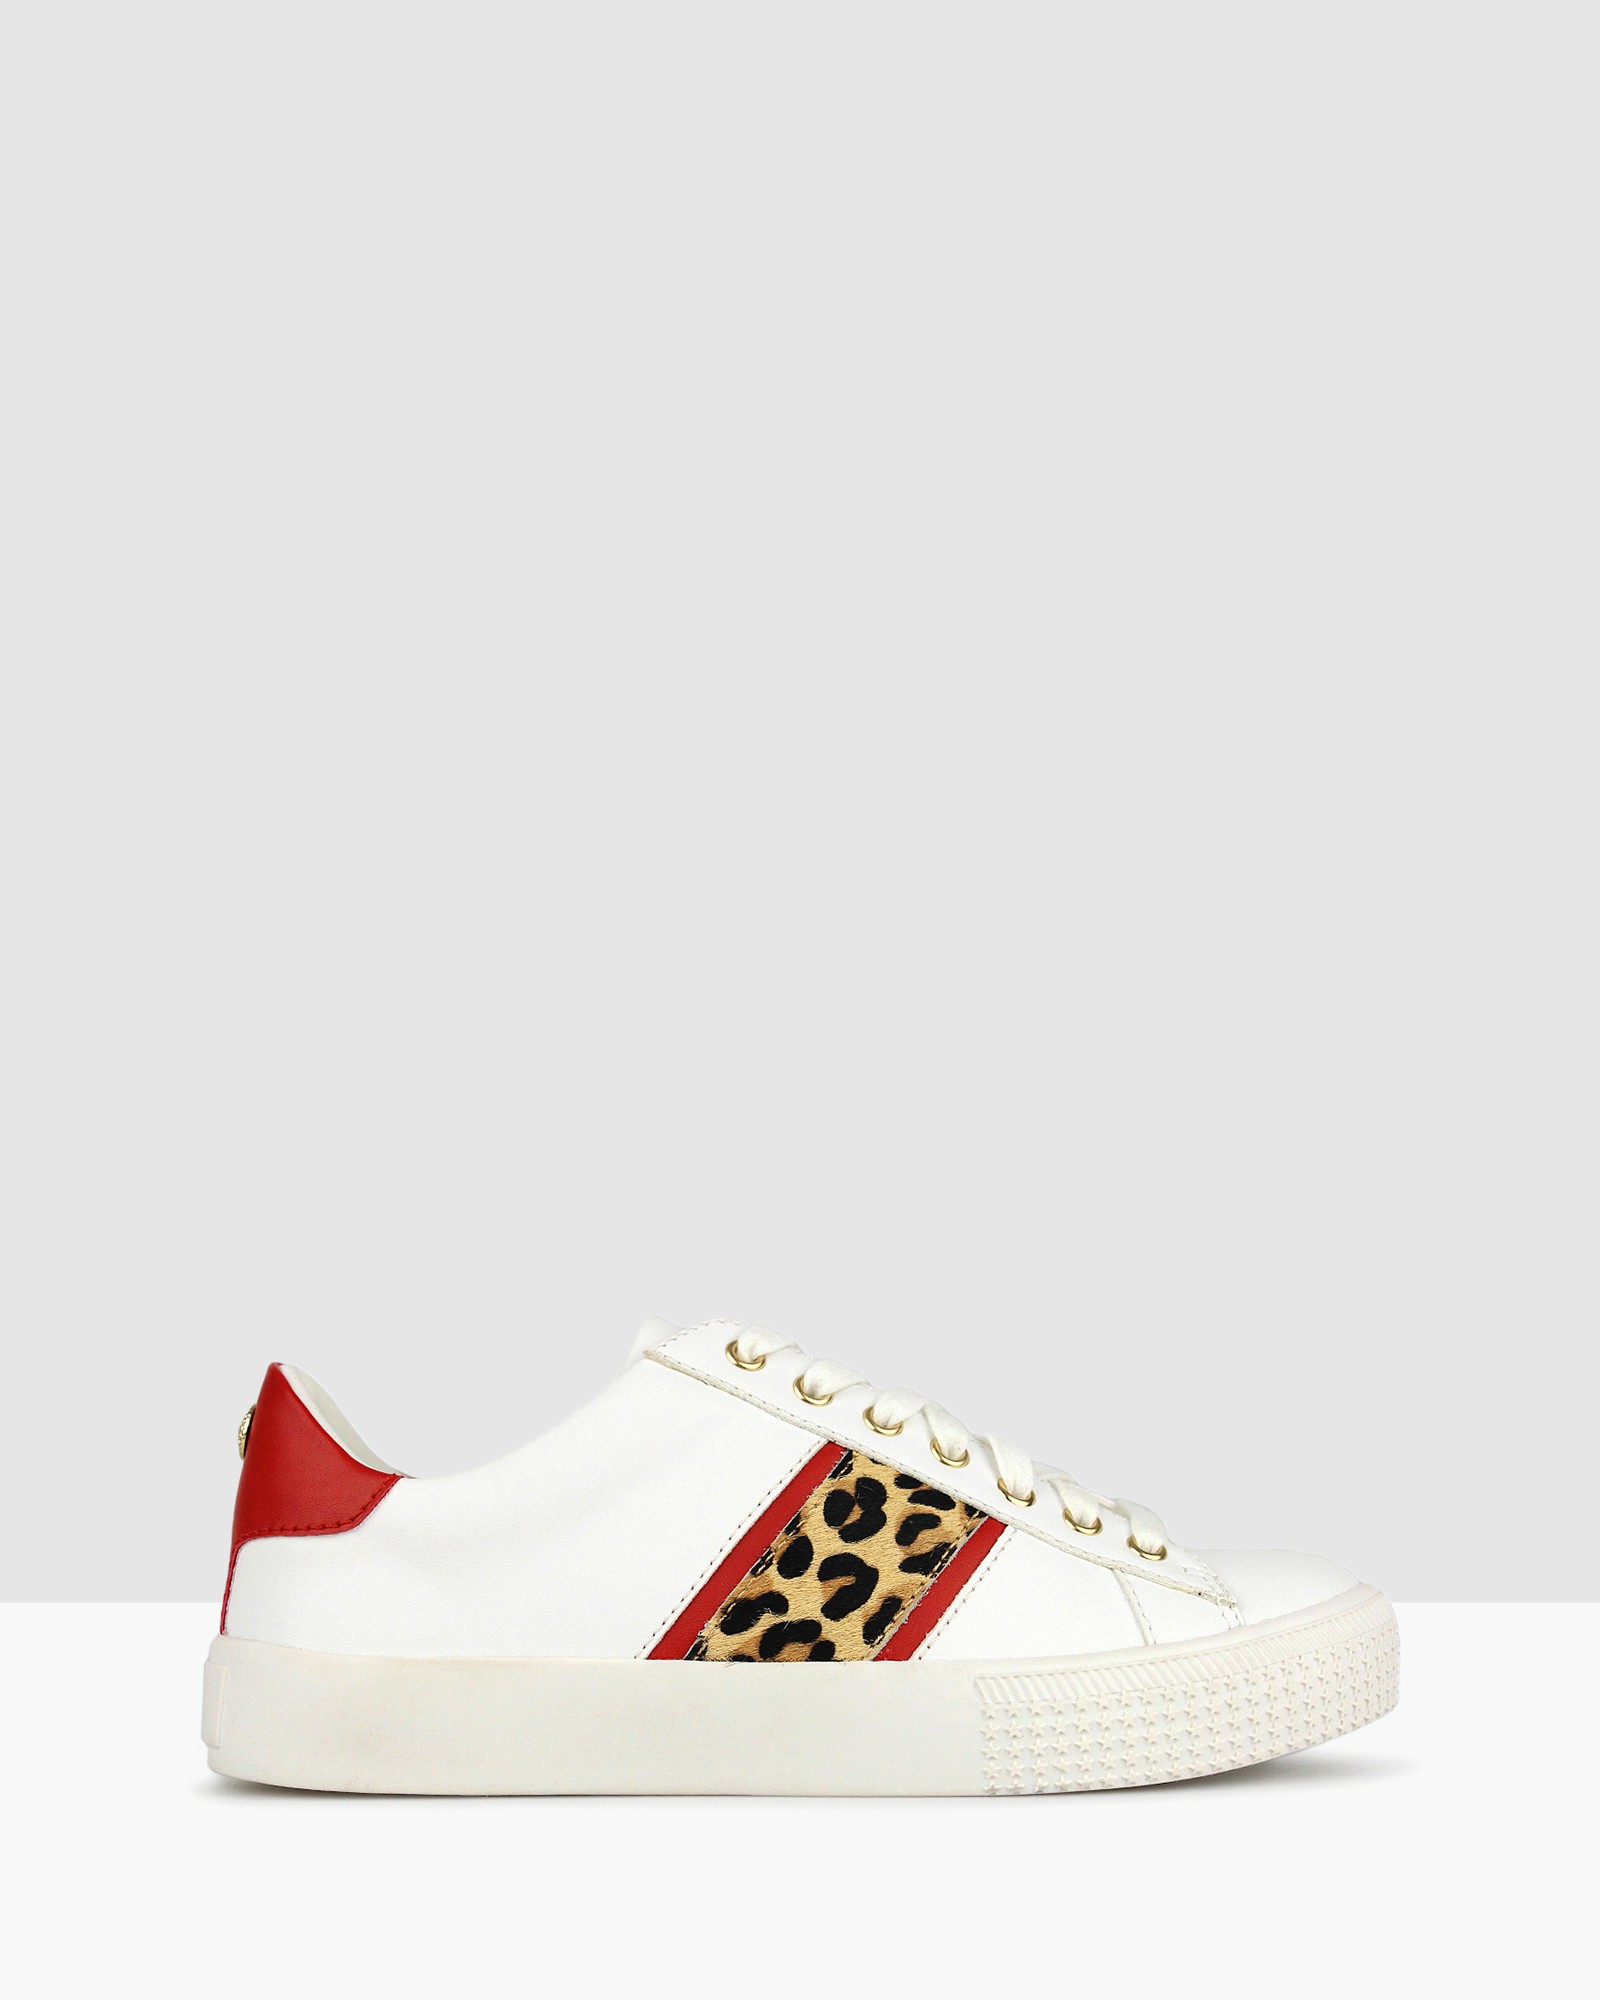 Purr Leopard Lifestyle Sneakers White by Betts | ShoeSales